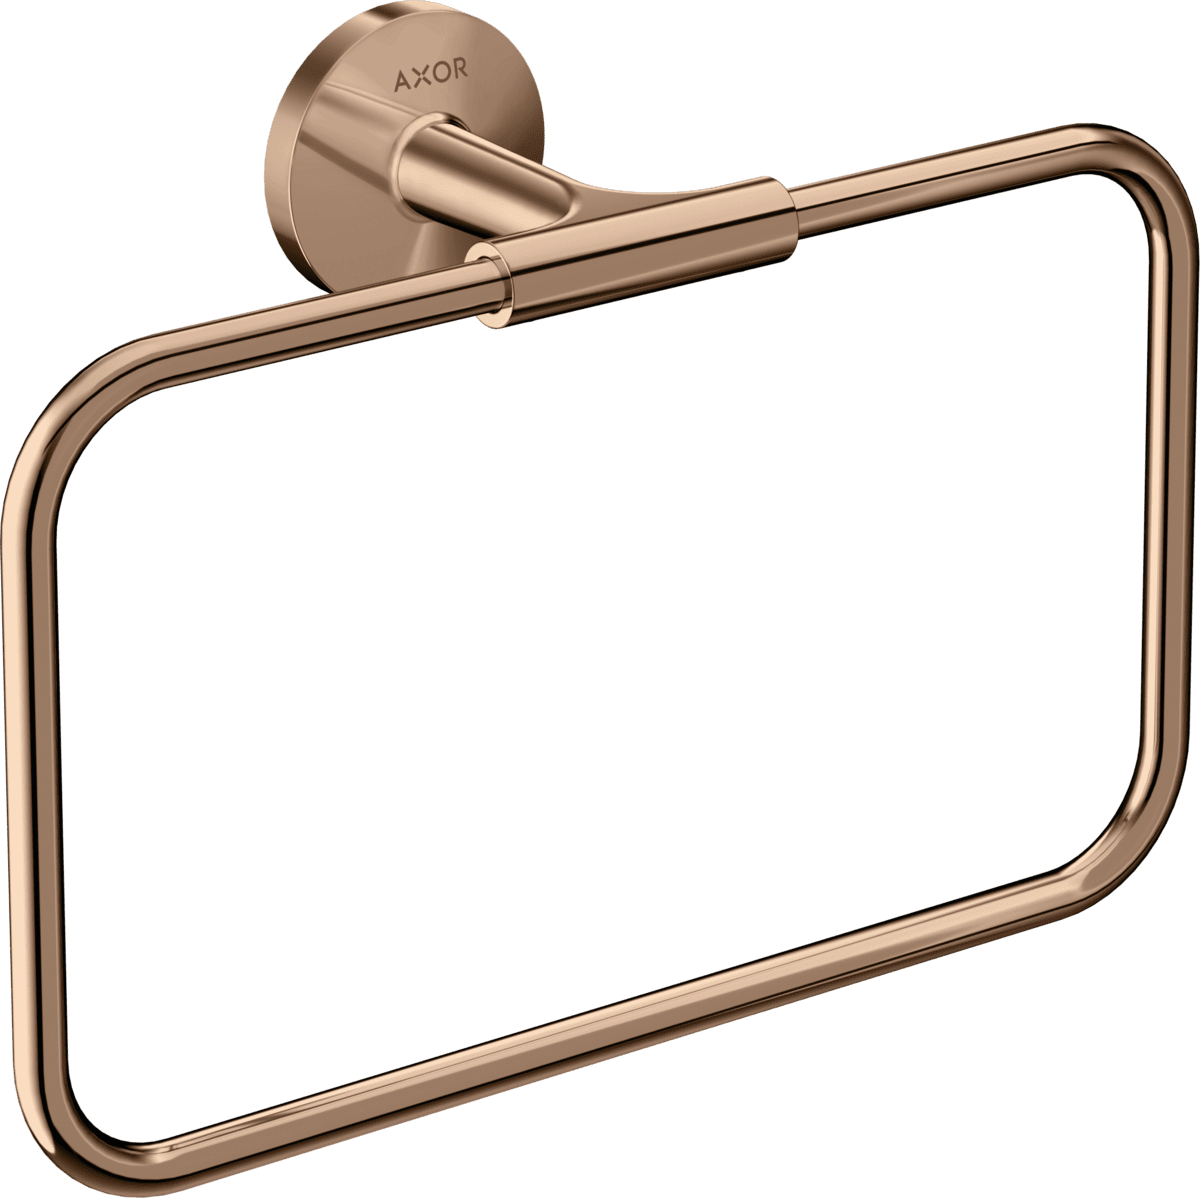 Picture of HANSGROHE AXOR Universal Circular Towel ring #42823300 - Polished Red Gold